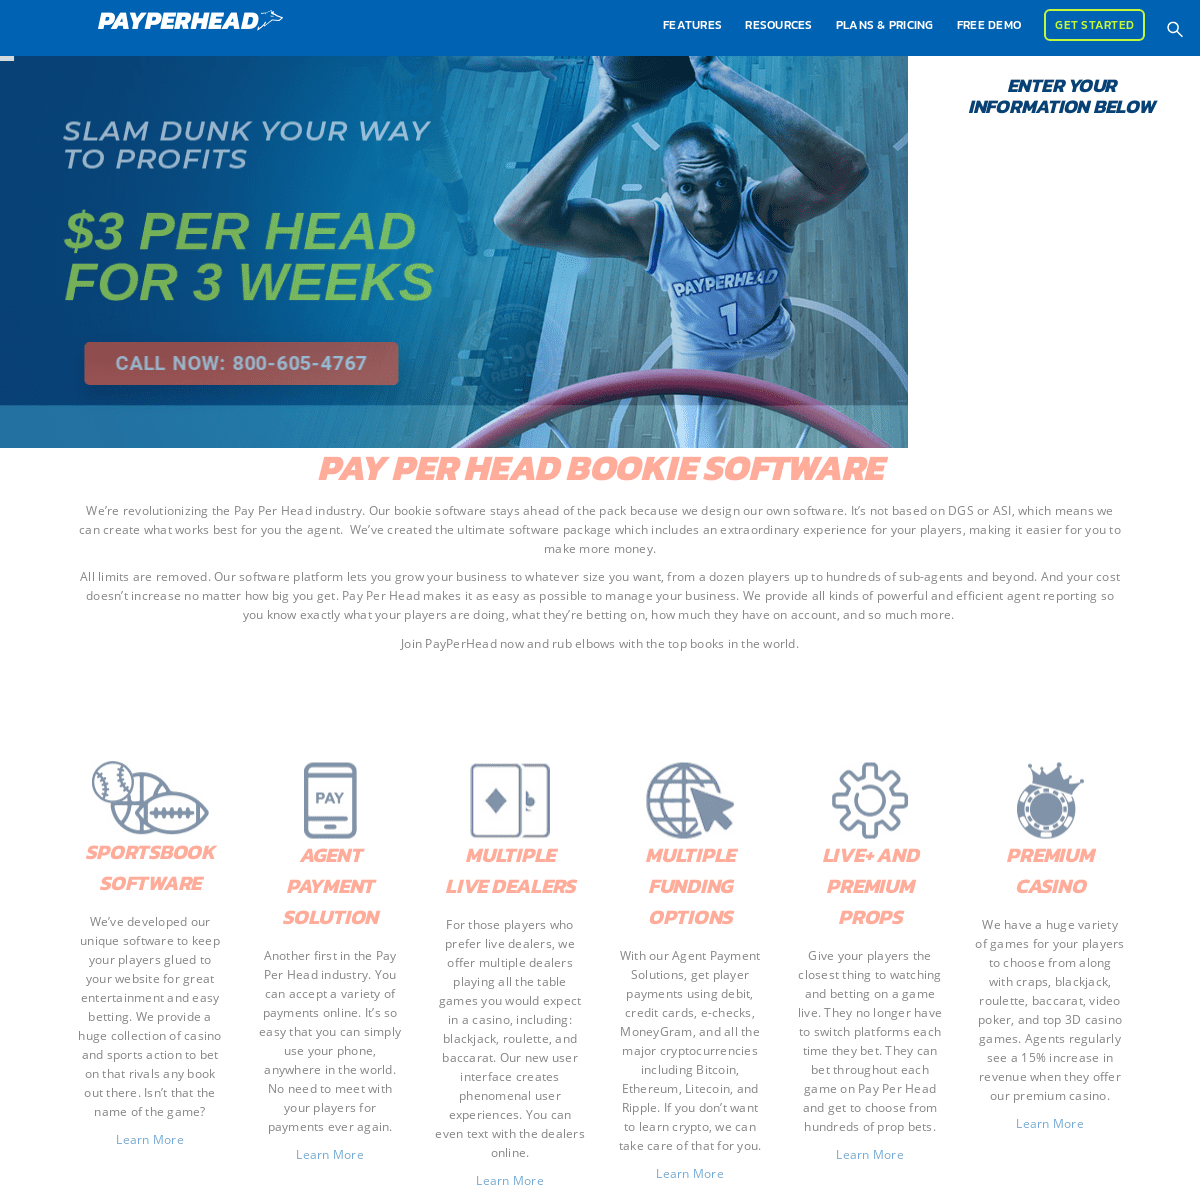 A complete backup of https://payperhead.com